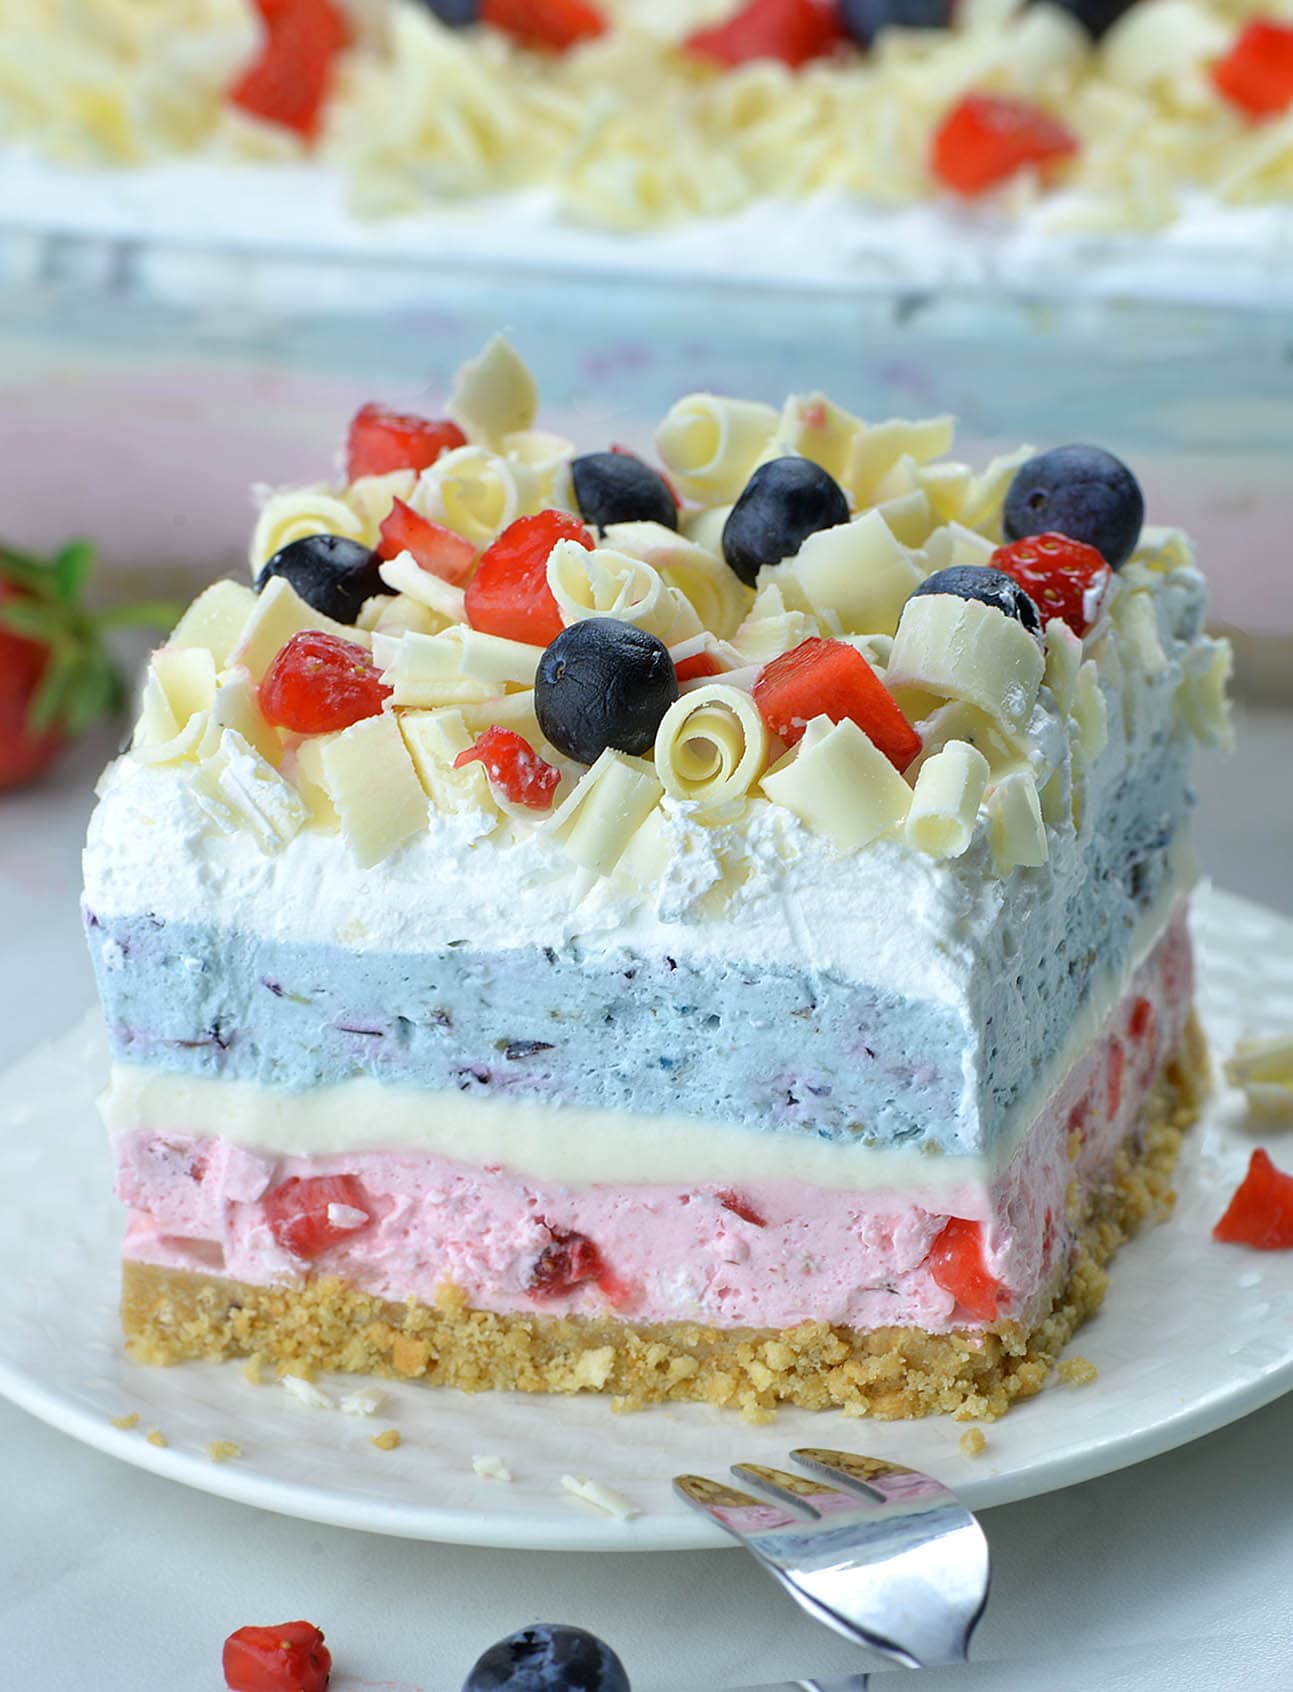 Big slice of Very Berry Dessert Lasagna - White layer in the middle is no bake cheesecake. Then, there’s blue layer-fresh blueberry mousse with Greek yogurt, berry blue Jello and whipped cream, too.